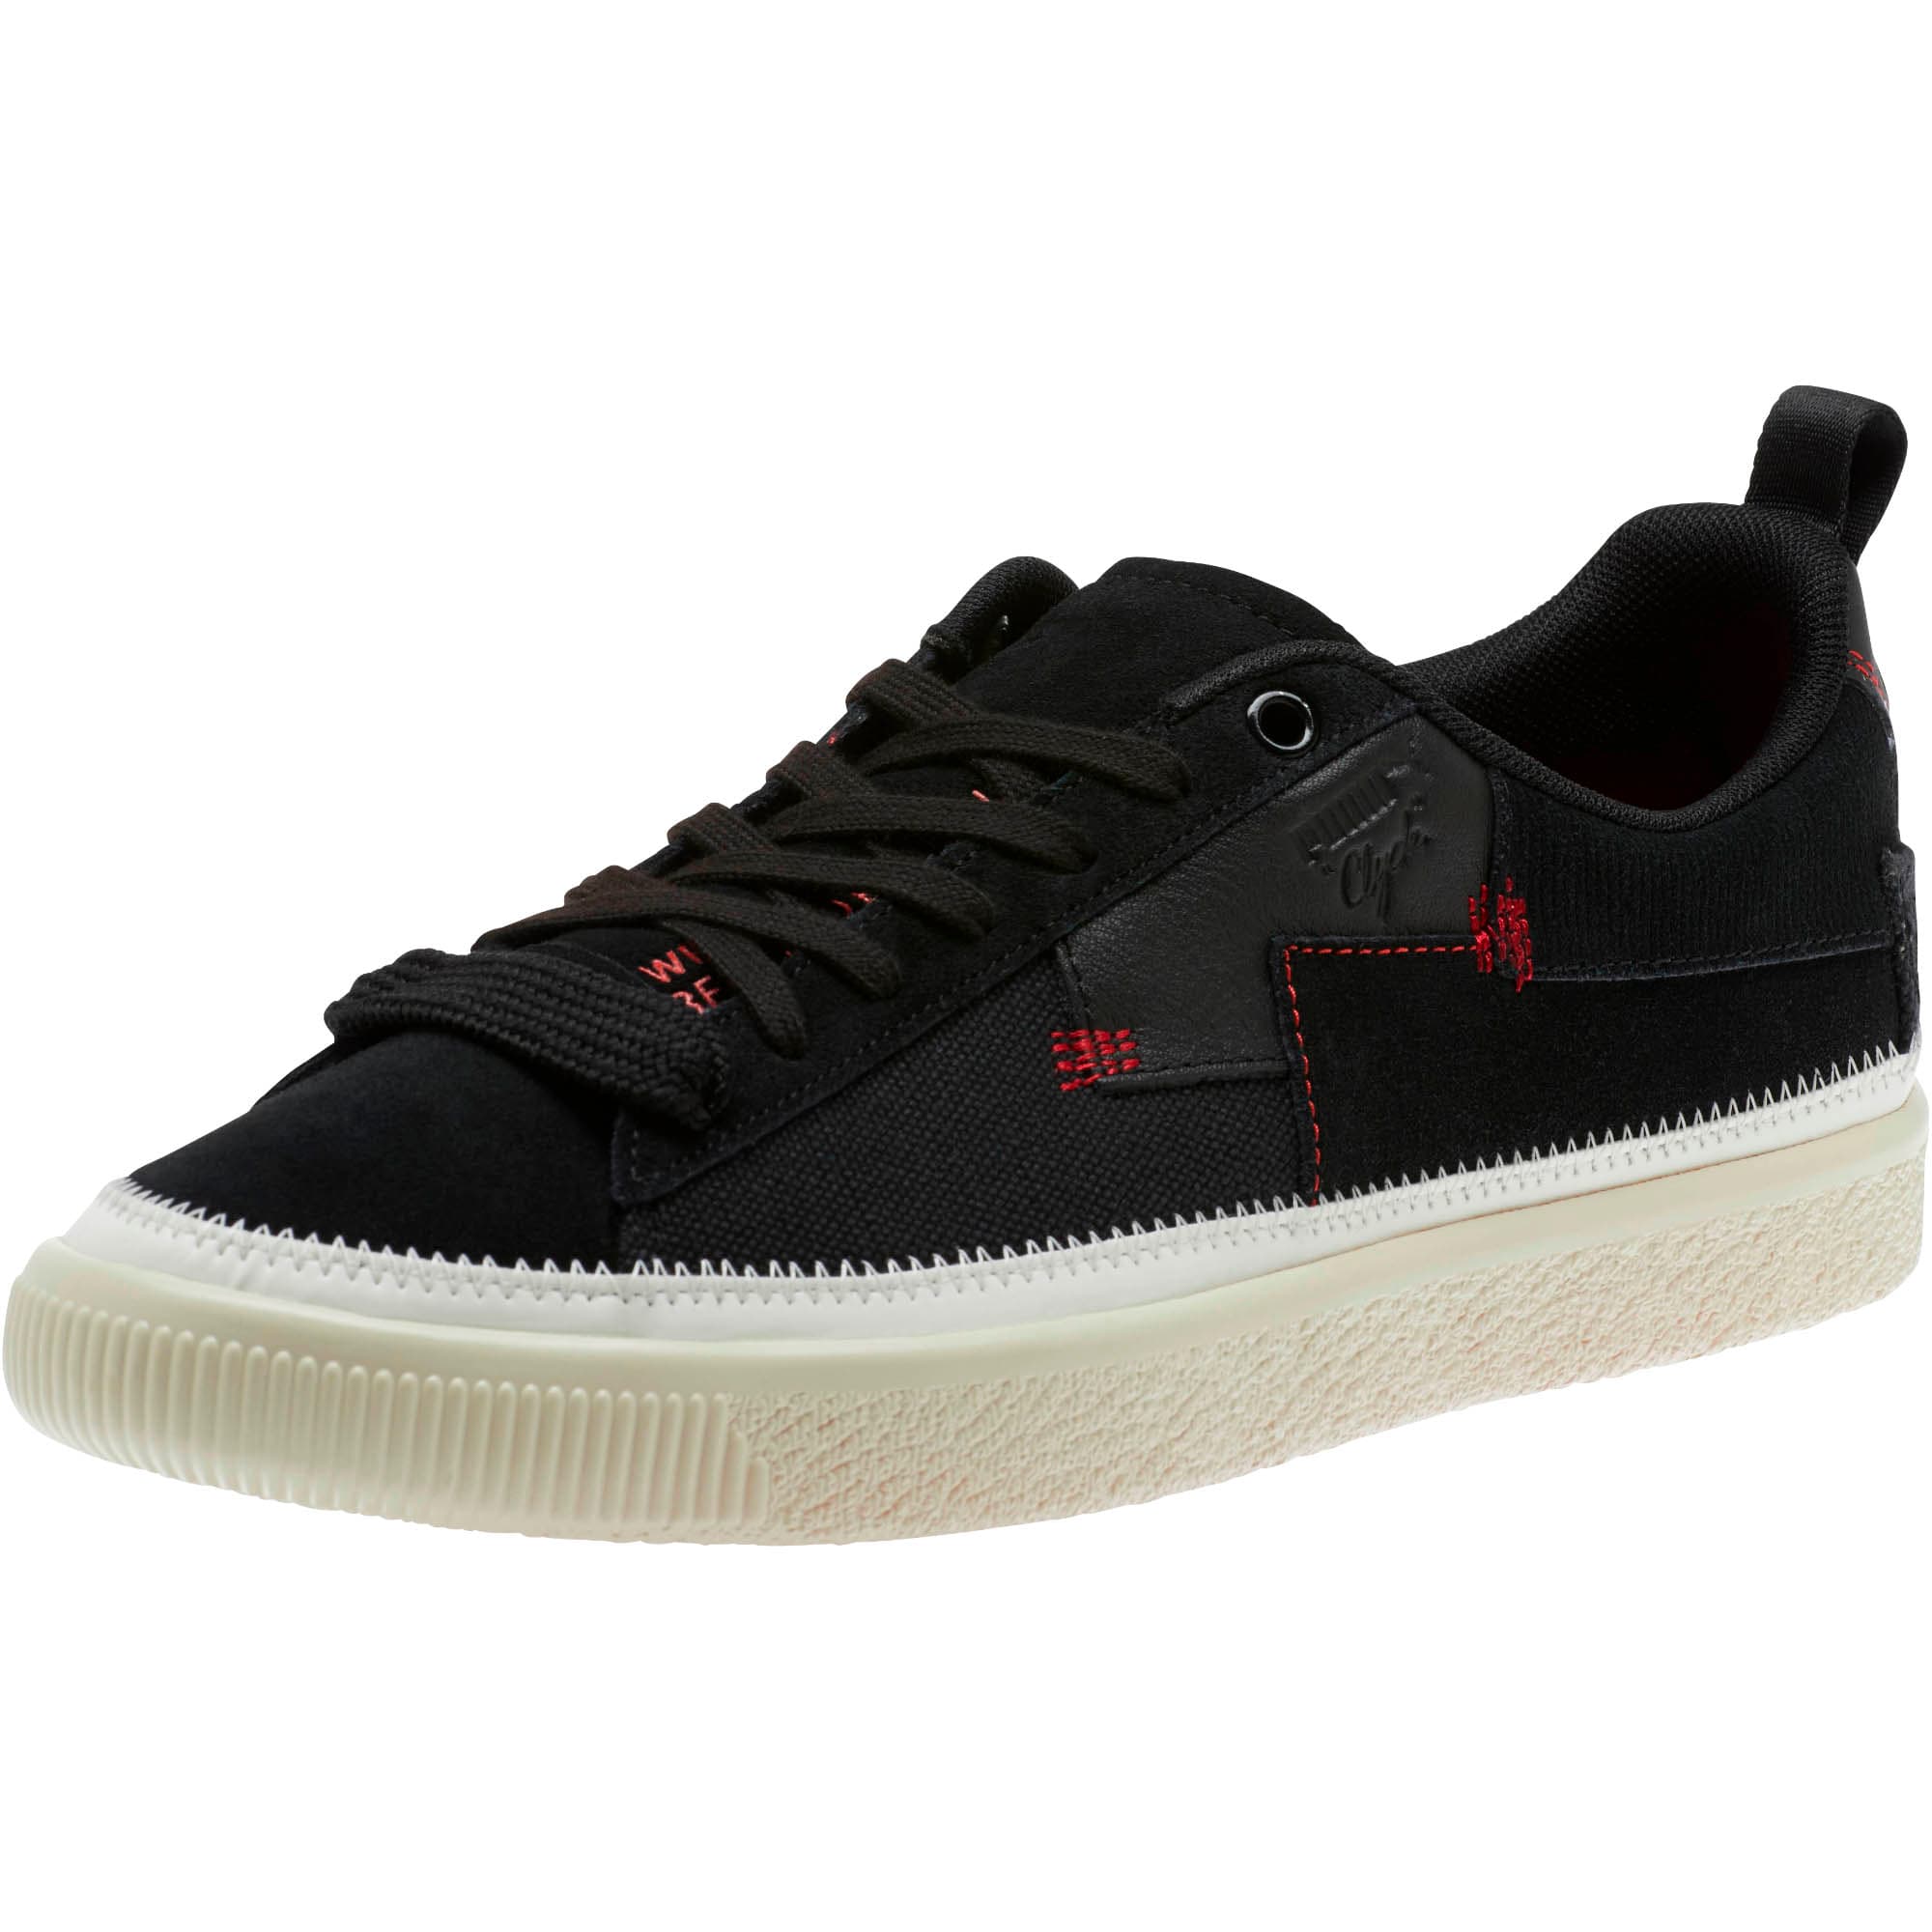 Clyde #REFORM Sneakers | PUMA US